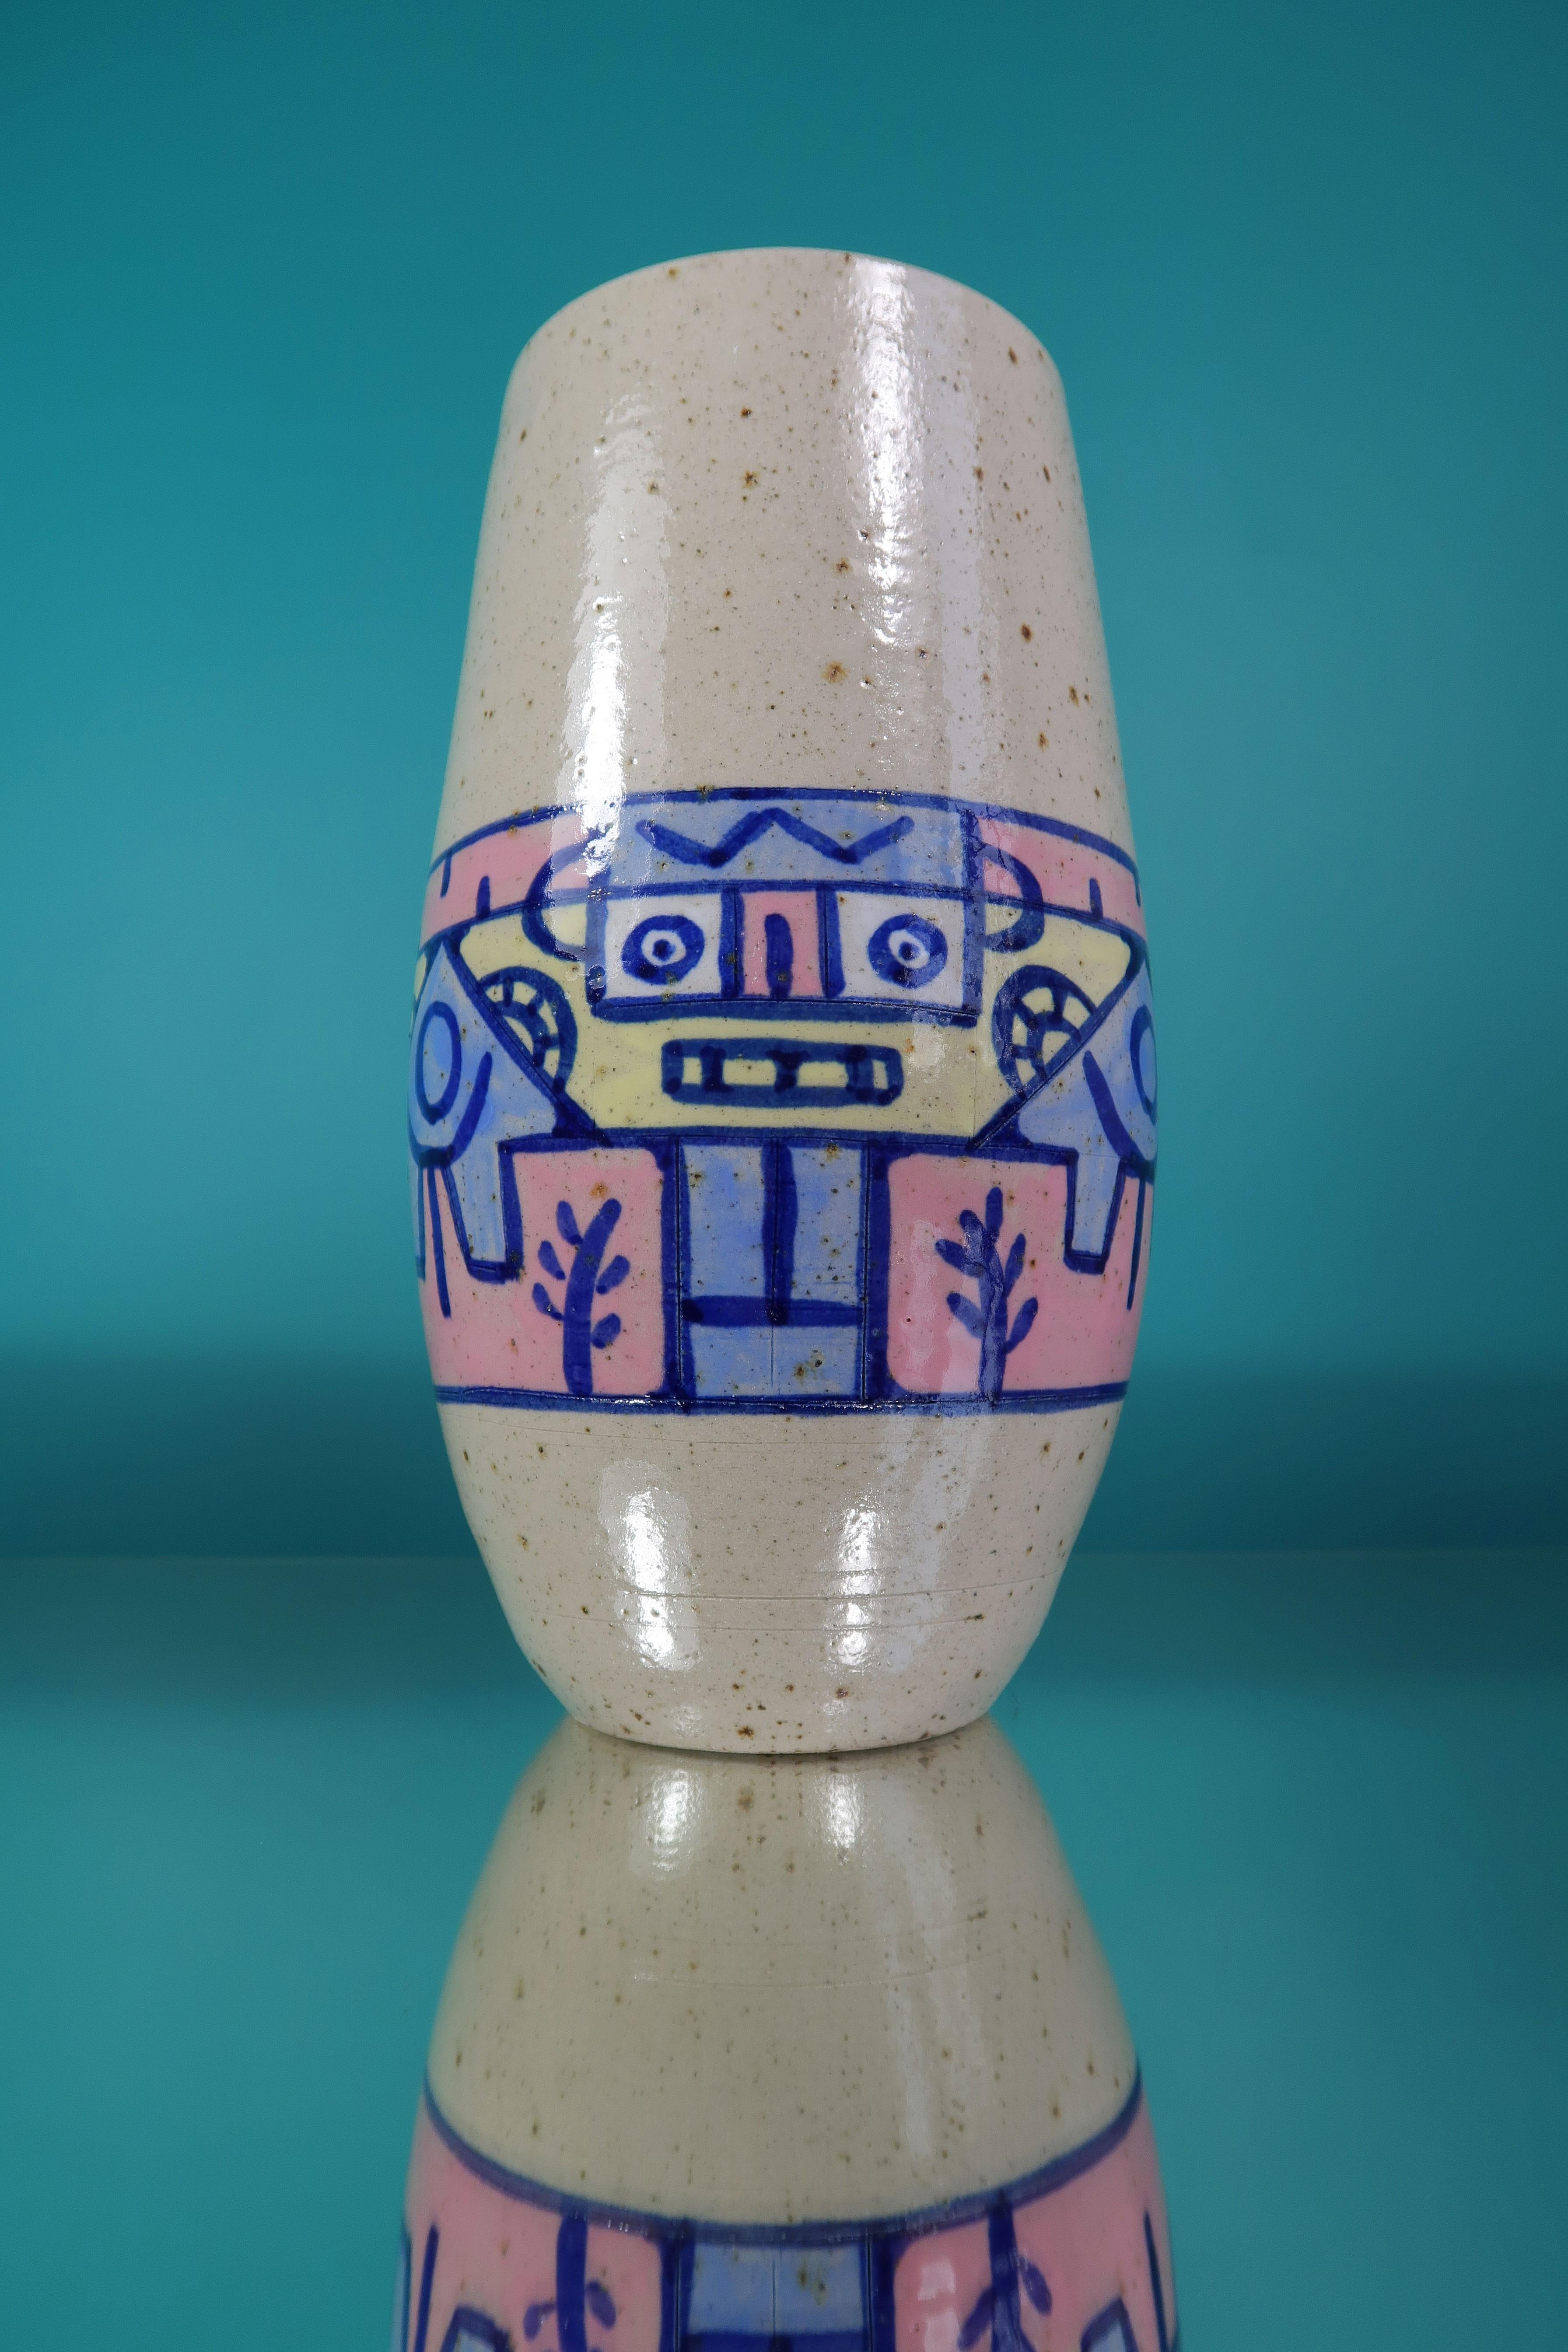 Sizeable modernist ceramic handmade, hand painted vase manufactured in 1990 by Néstor. Multicolored cubist decorations in pink, yellow and blue under clear glaze. Beautiful vintage condition. Signed under base.
Europe, 1990. 